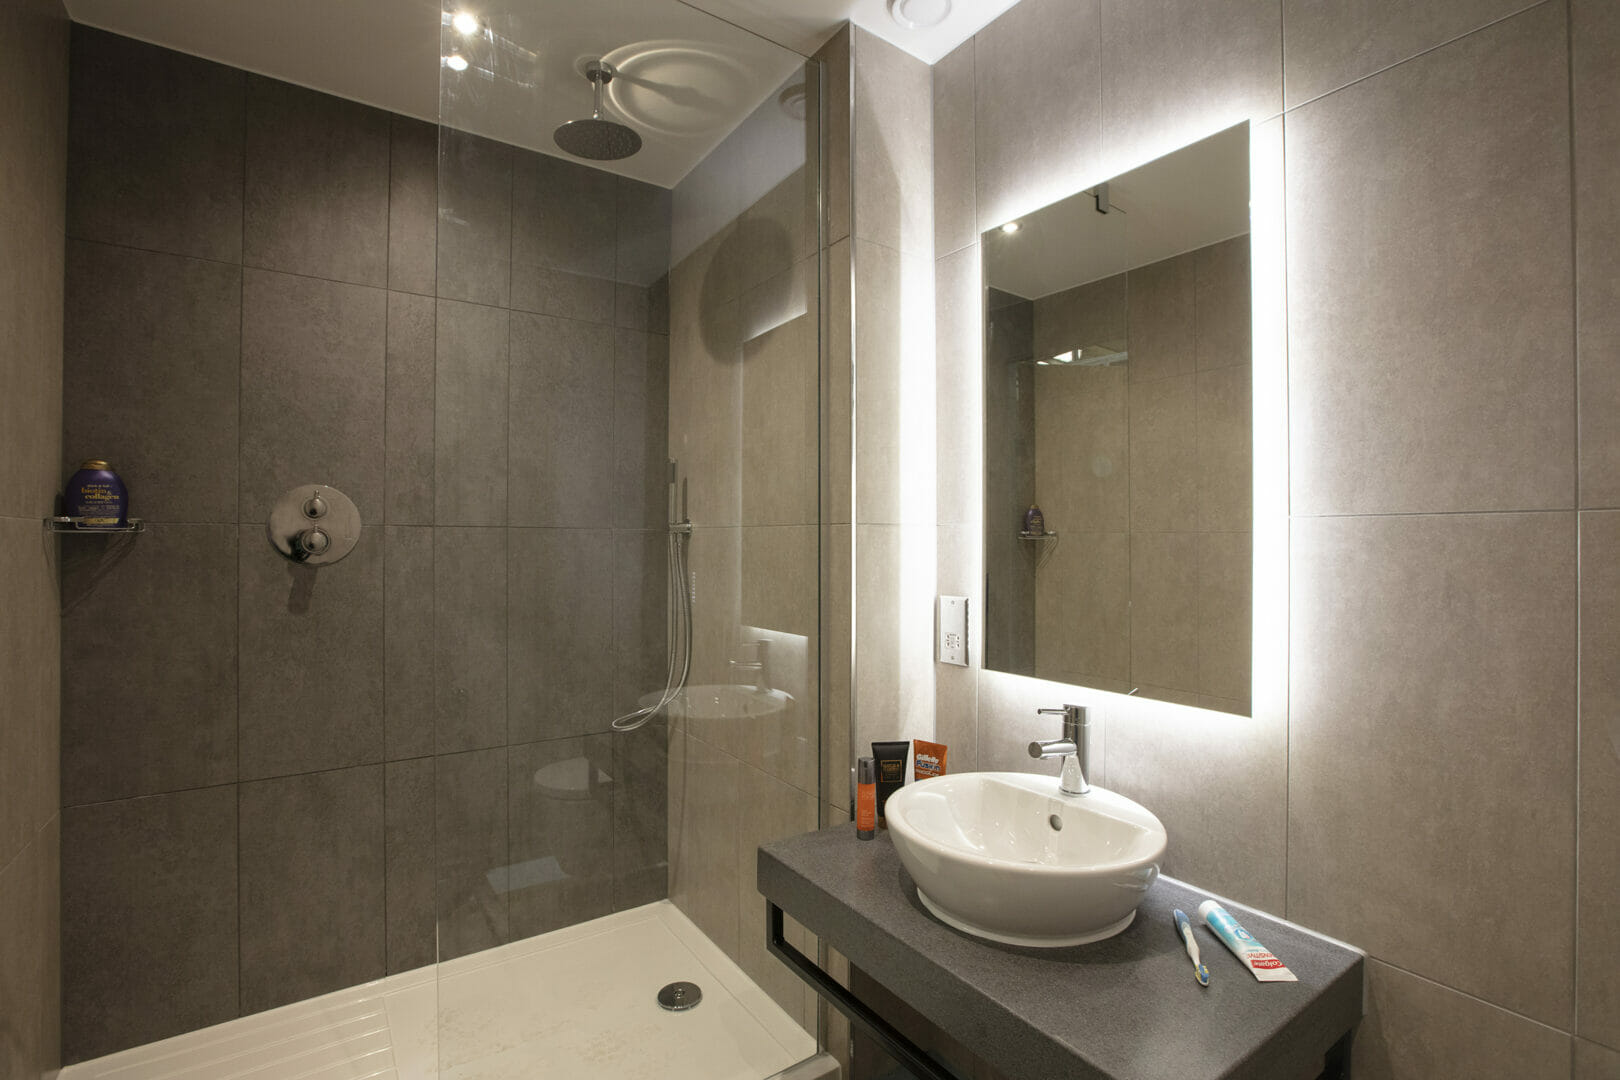 WINVIC AWARDS £1.2m CONTRACT TO OFFSITE SOLUTIONS TO SUPPLY BATHROOM PODS FOR NEW LUXURY BUSINESS HOTEL IN MILTON KEYNES